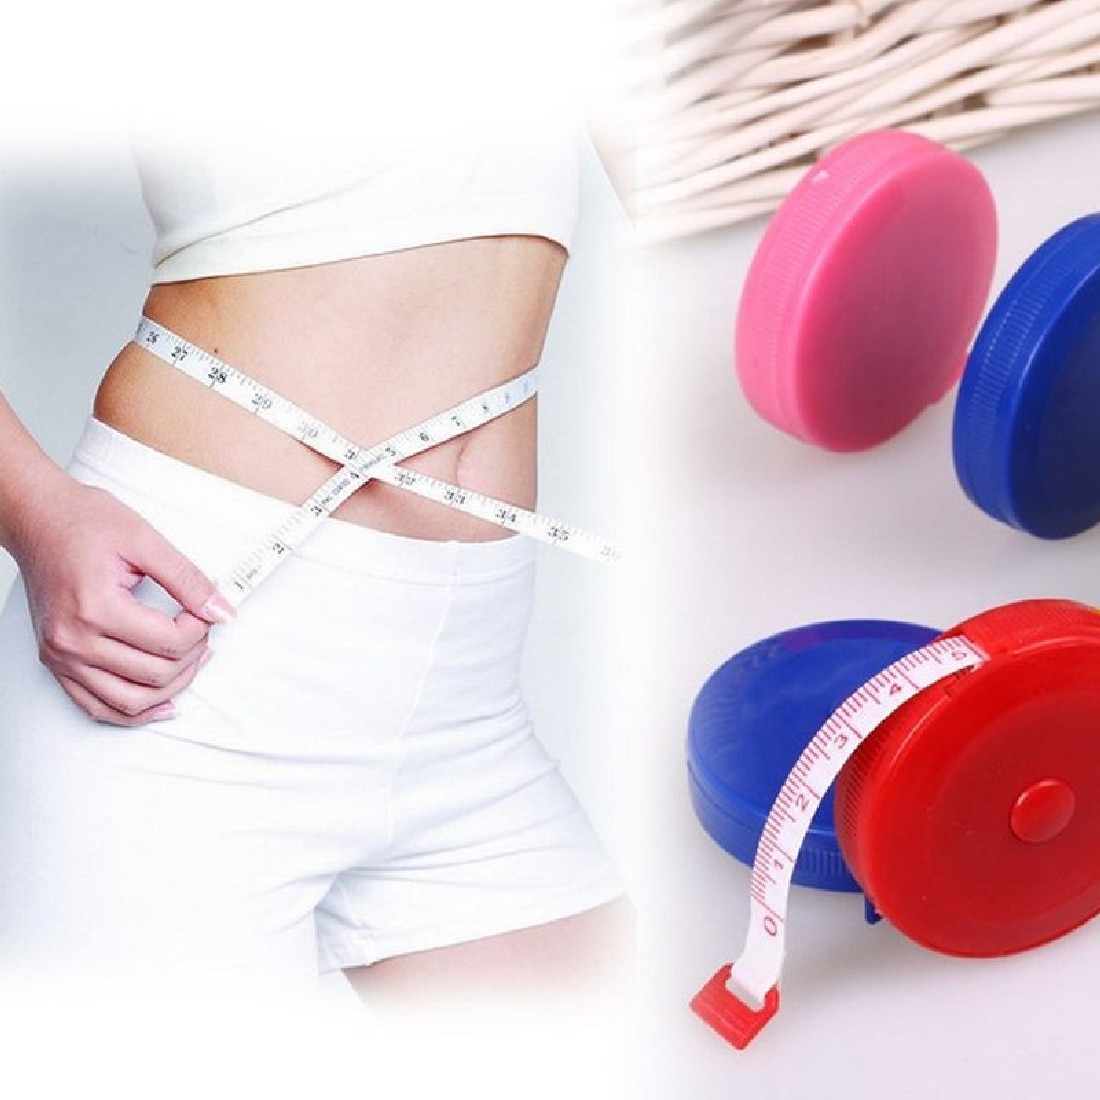 Fitness Accurate Body Fat Caliper Measuring Body Tape Ruler Measure Tape Measure Body Fat Caliper 150cm/ 60 Inch for Arm/ Chest